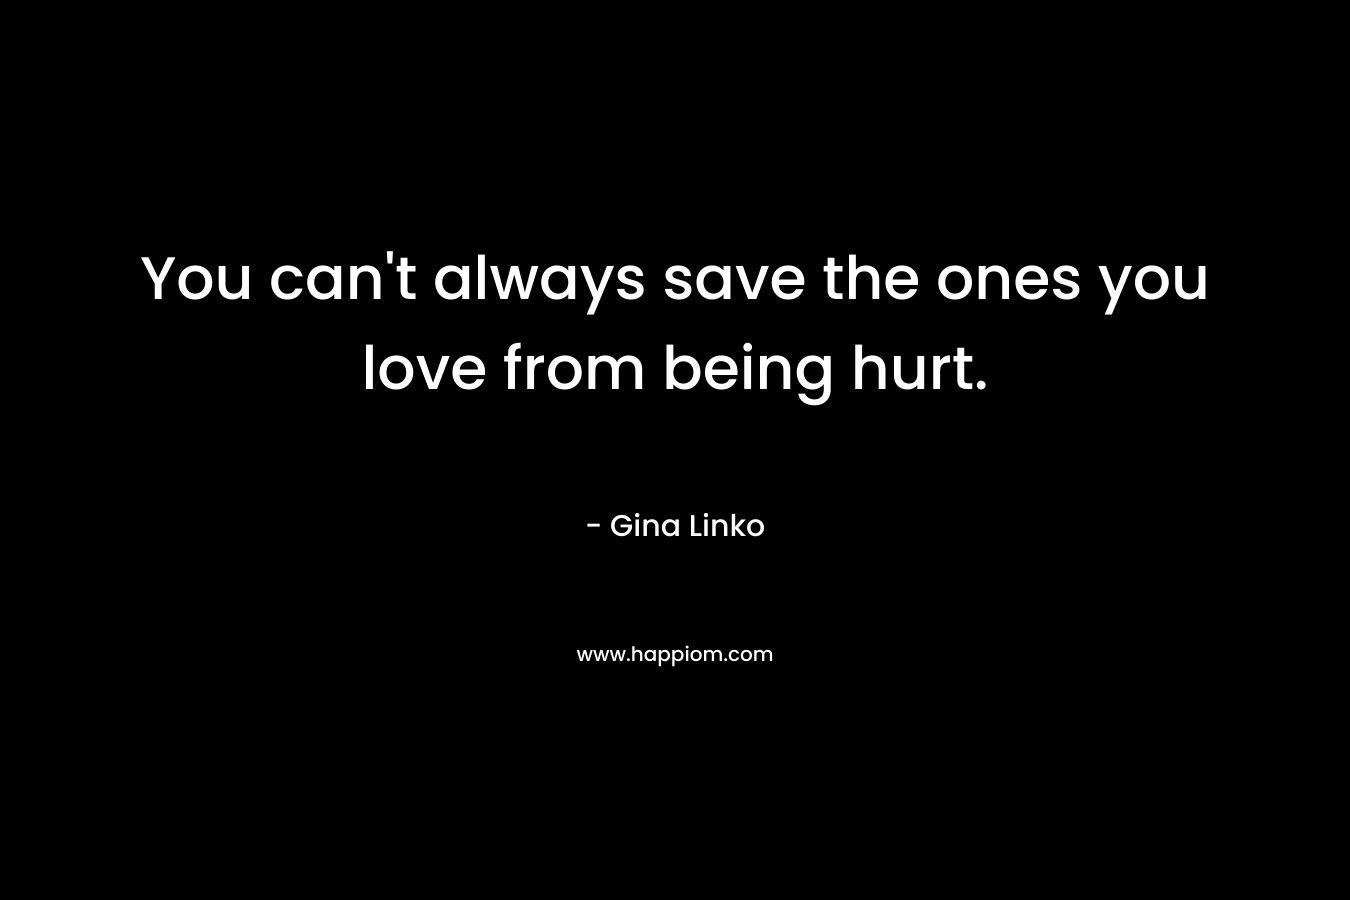 You can't always save the ones you love from being hurt.